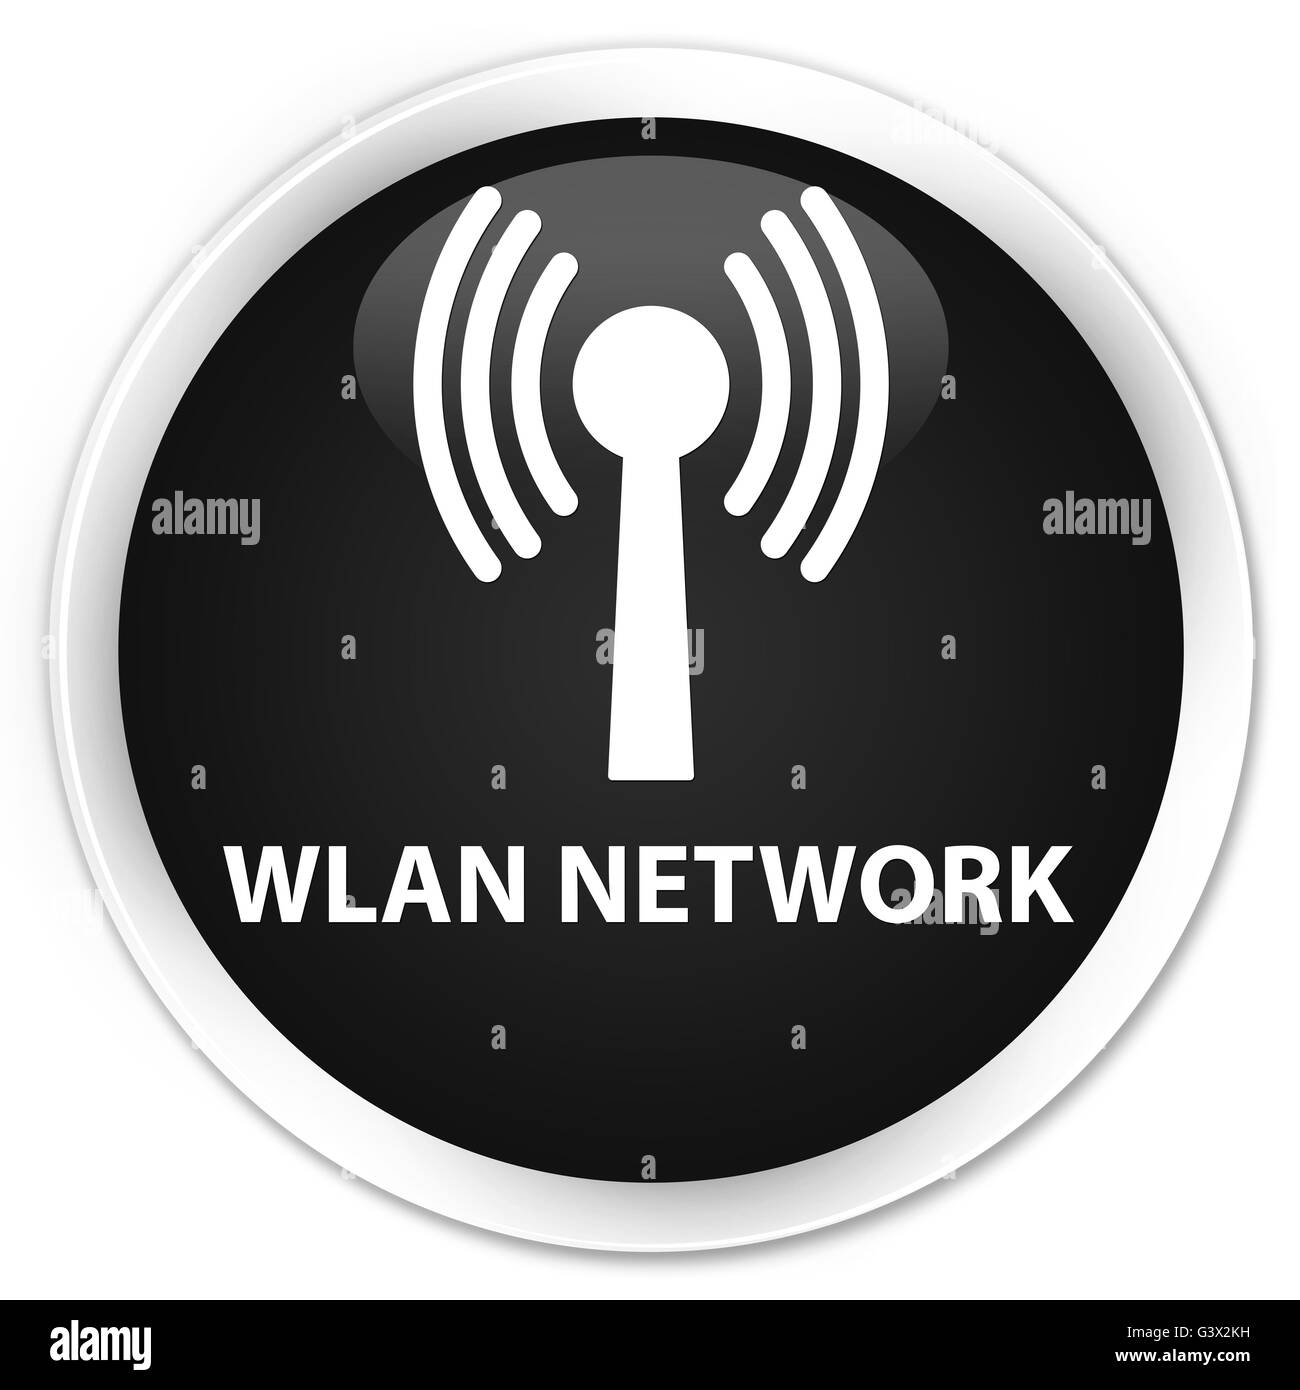 Wlan network isolated on premium black round button abstract illustration Stock Photo